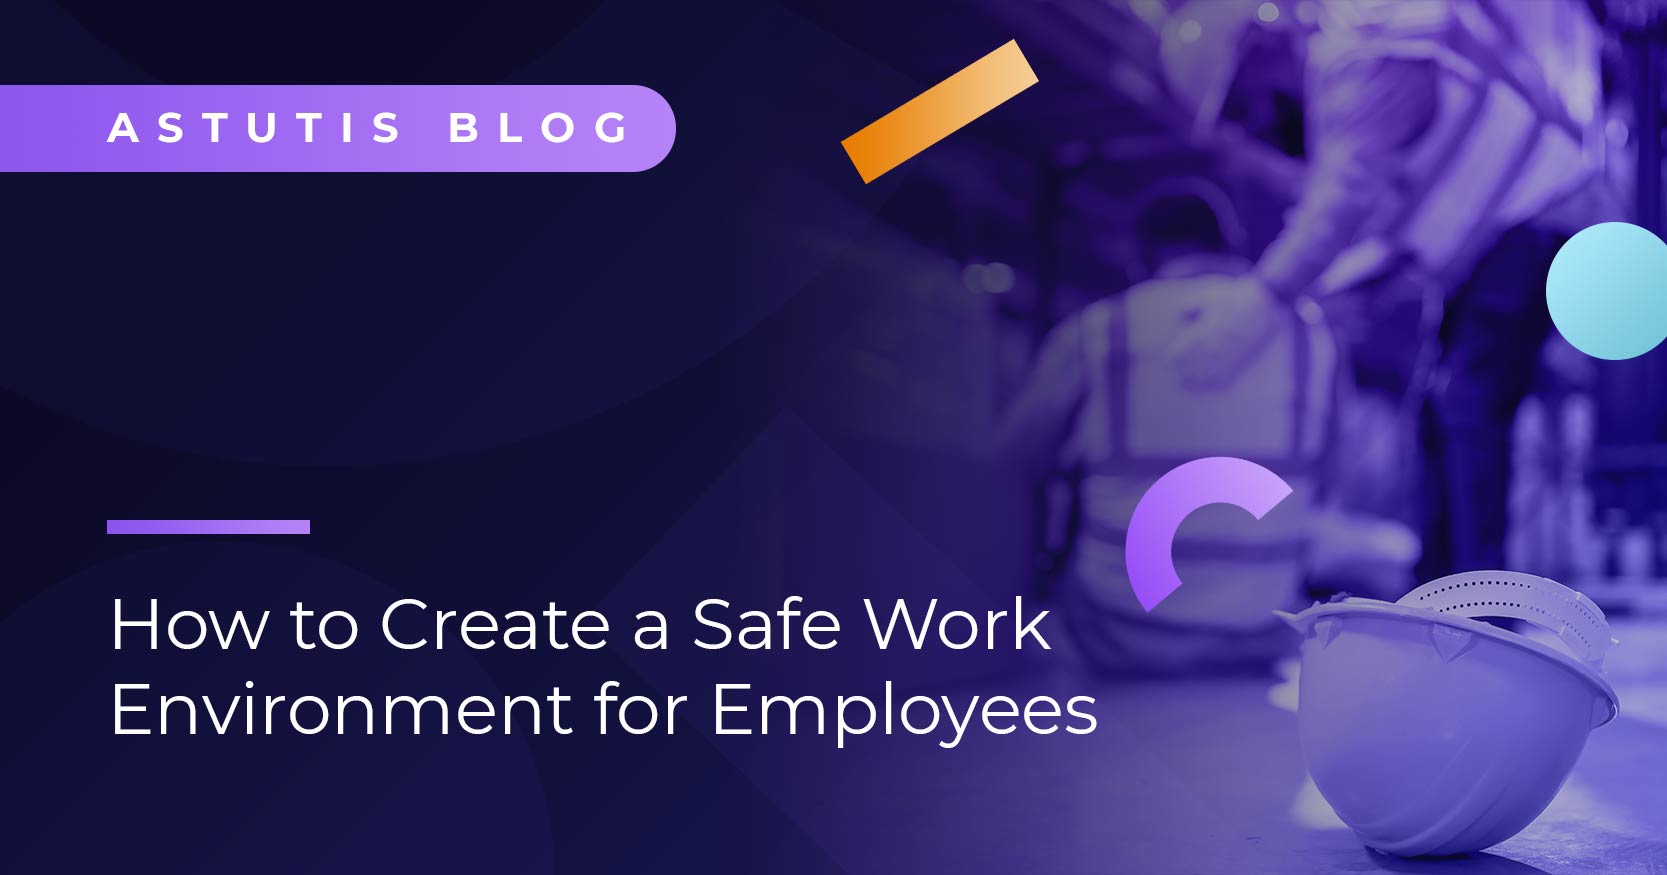 How to Create a Safe Work Environment for Employees Image